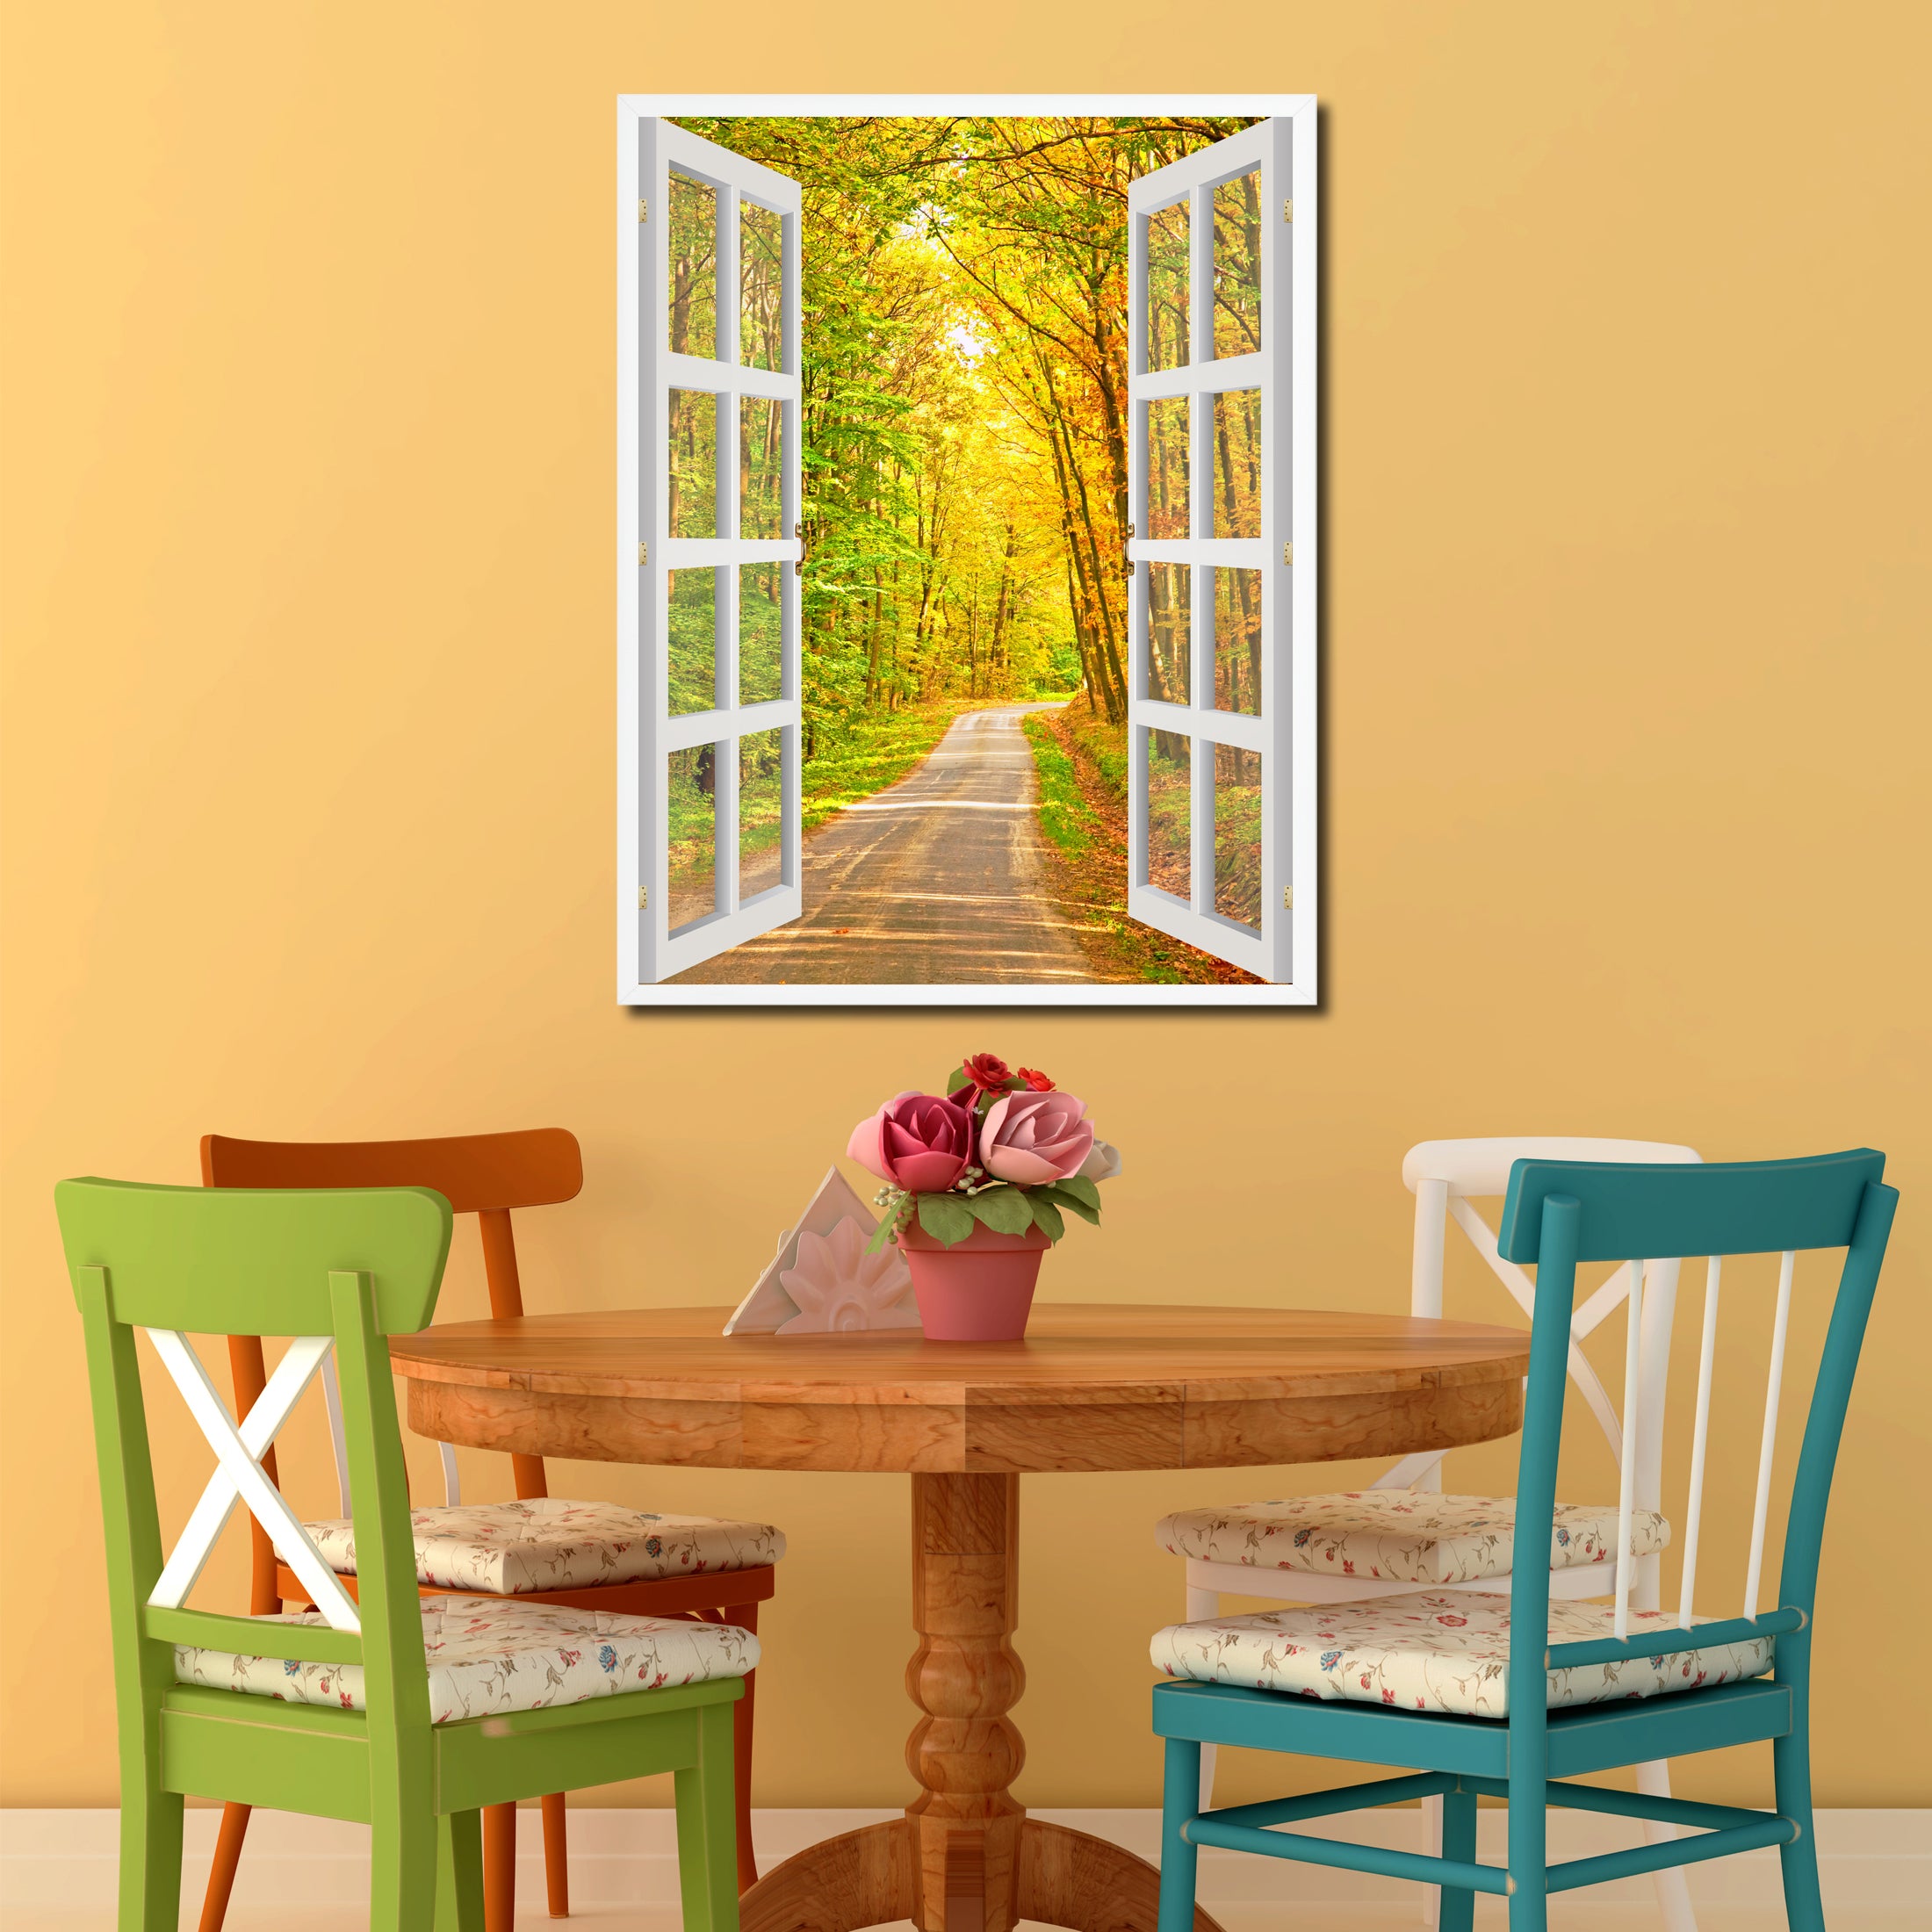 Pathway Autumn Park Fall Forest Picture French Window Canvas Print with Frame Gifts Home Decor Wall Art Collection